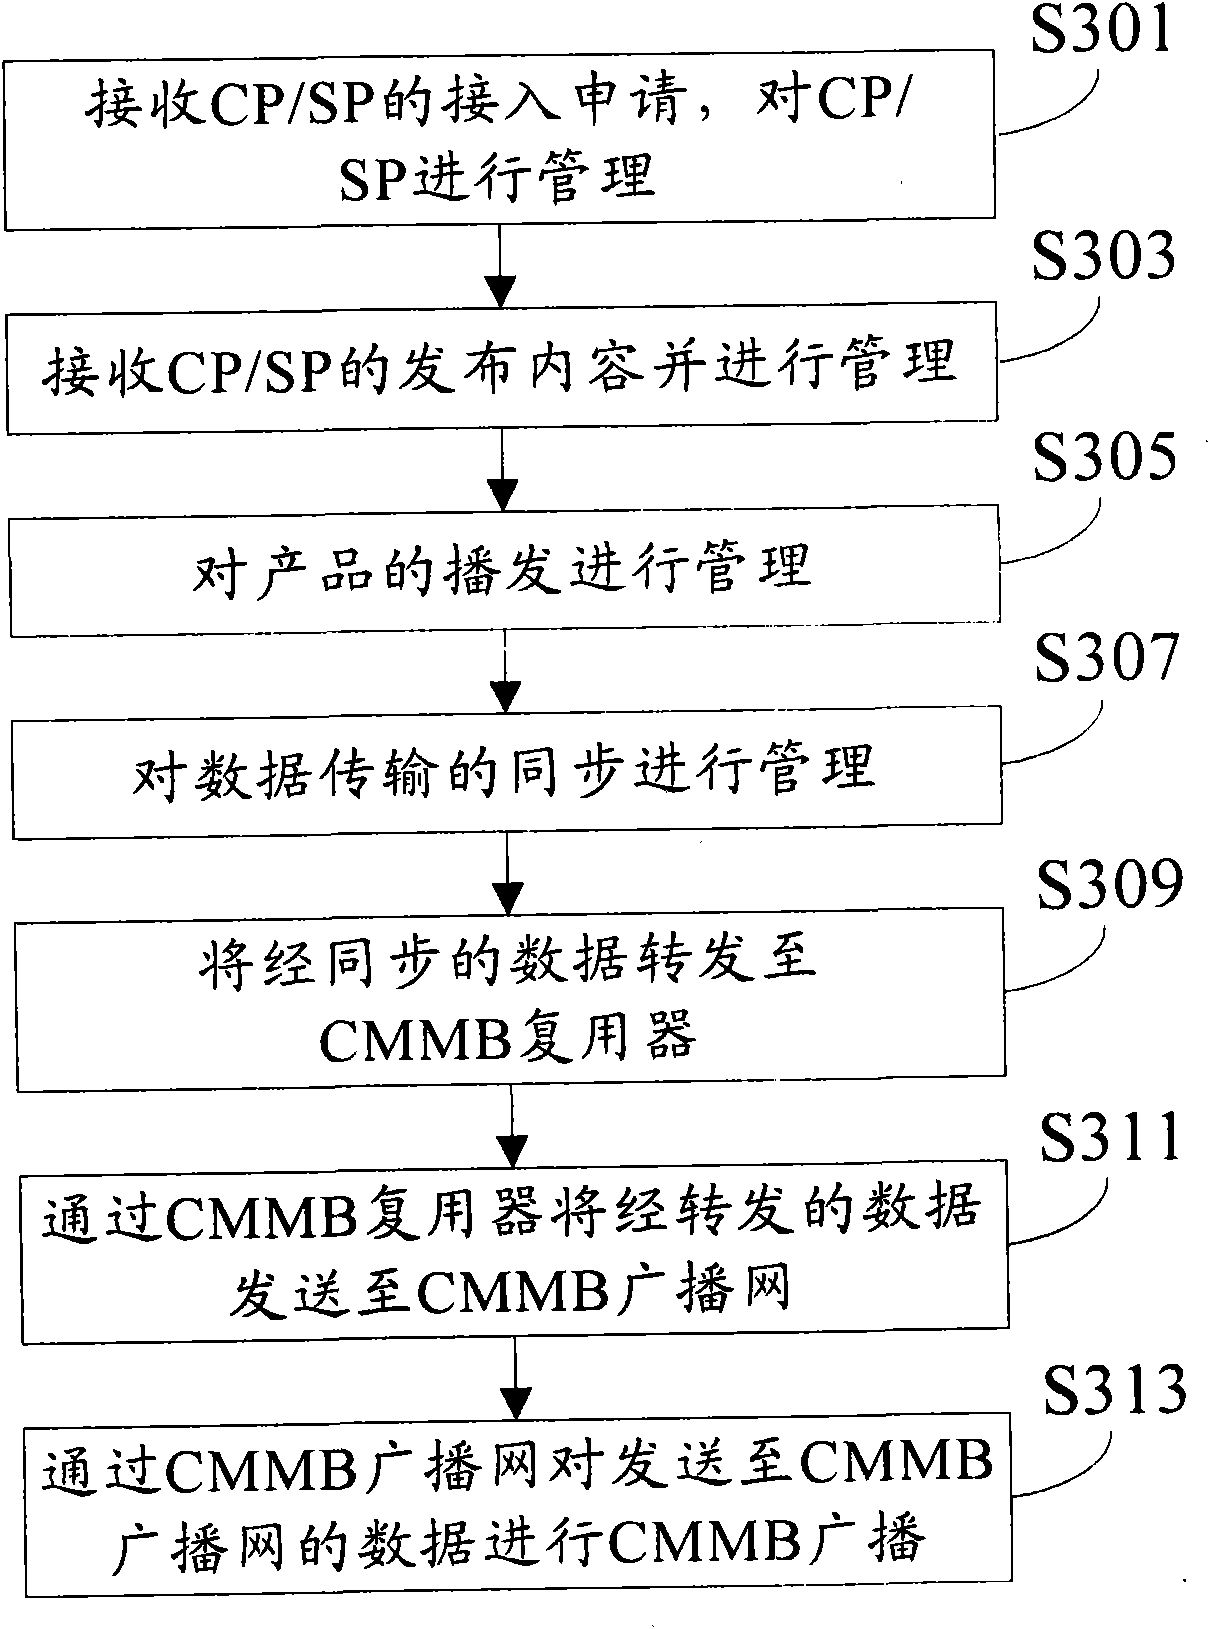 Electronic newspaper receiving terminal and method based on CMMB (China Mobile Multimedia Broadcasting)